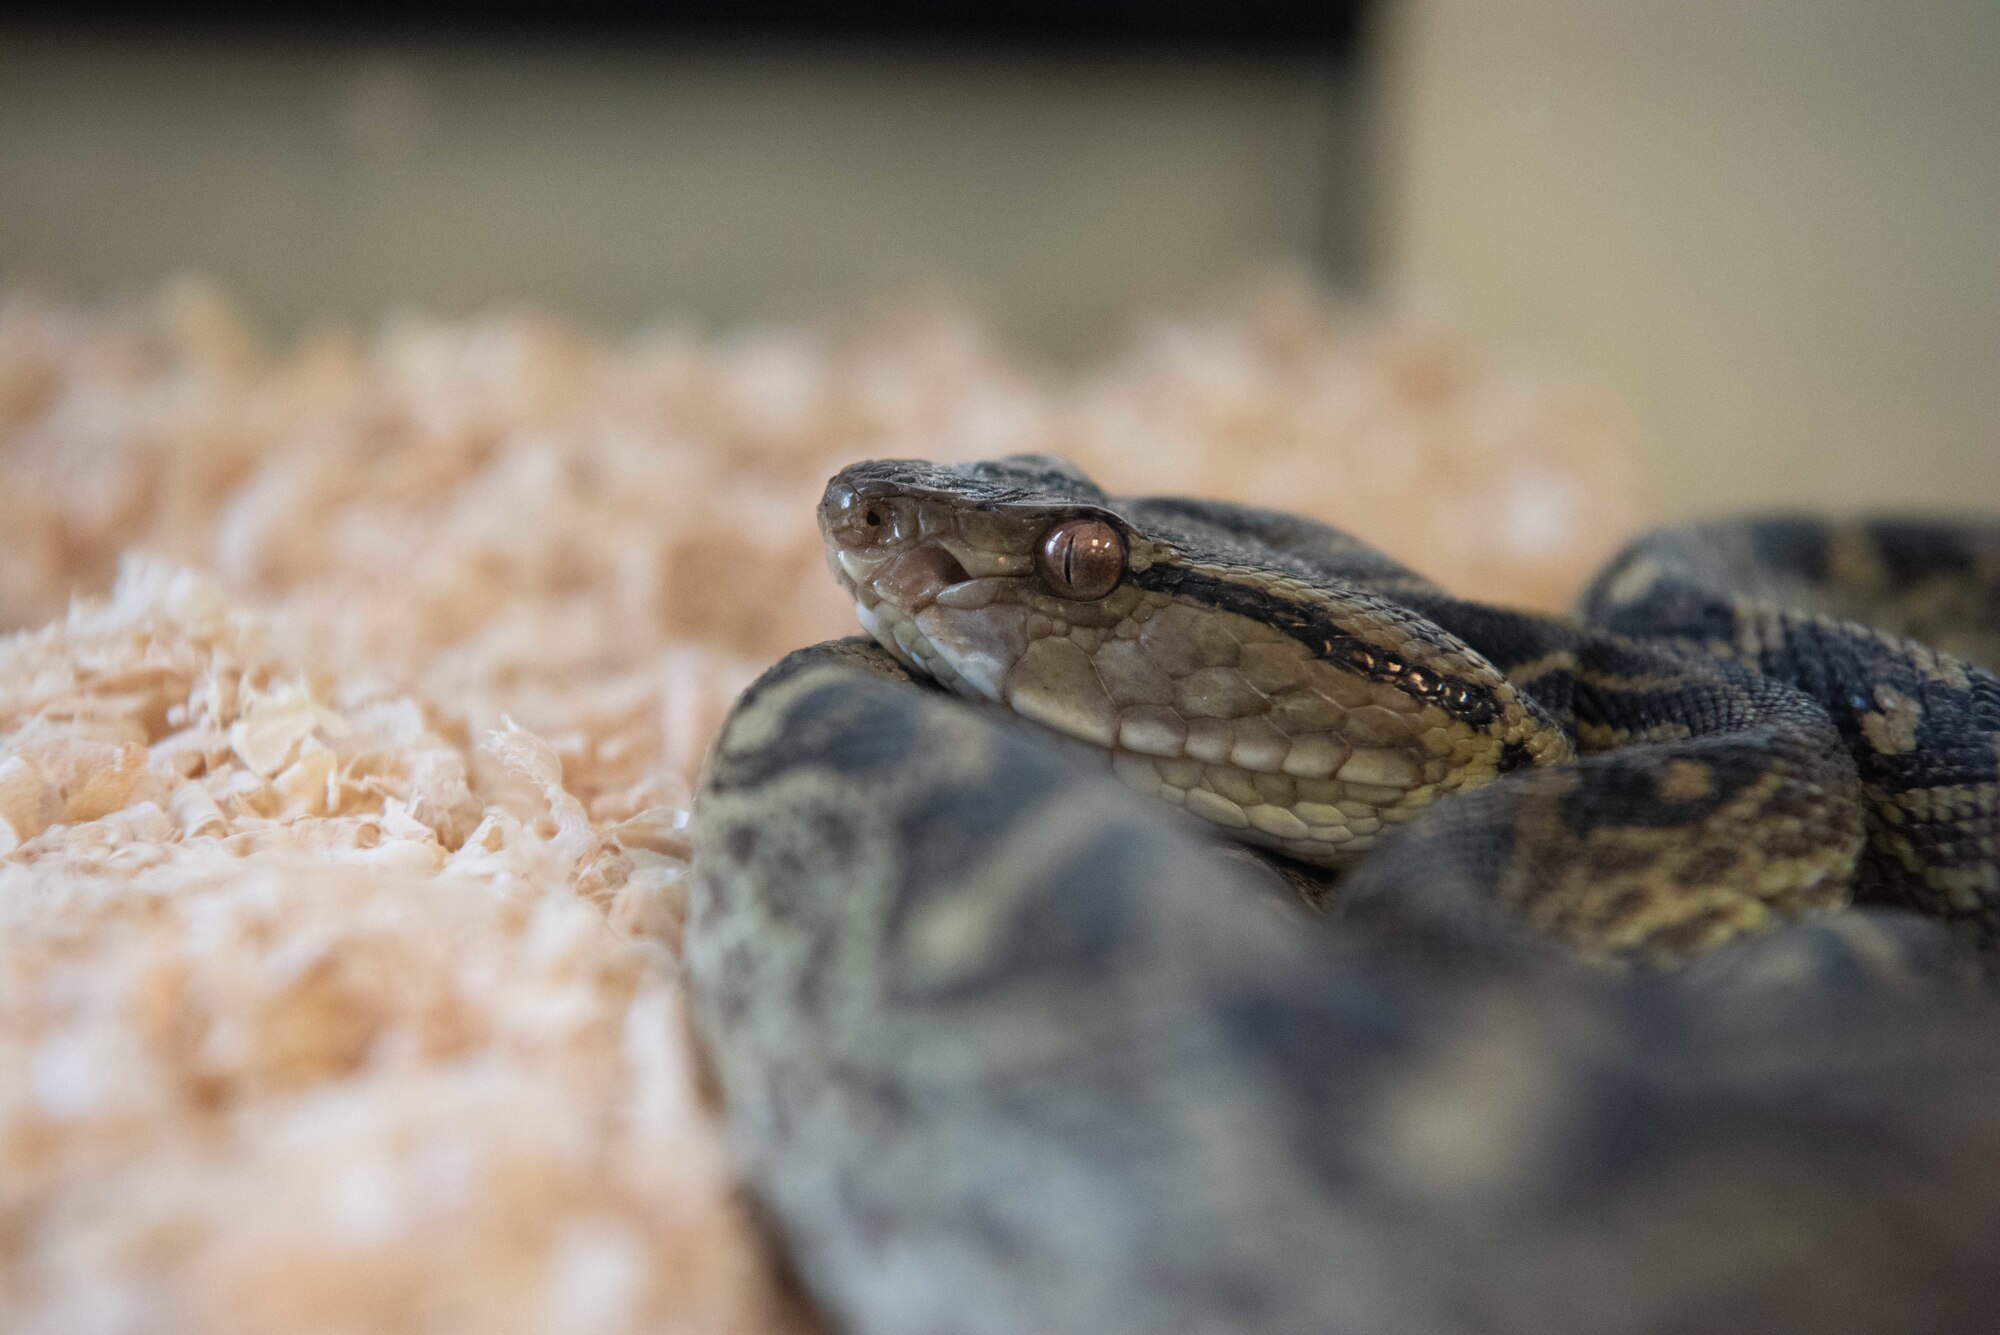 A Taiwanese Habu Snake, or Protobothrops Mucrosquamatus, watches onlookers from the corner of a terrarium at the Entomology Pest Management Section, June 5, 2019, At Kadena Air Base, Japan. The Taiwanese Habu snake is an invasive species that is not only harmful to the ecosystem, but also venomous and poses a danger to humans on the island. (U.S. Air Force photo by Senior Airman Kristan Campbell)